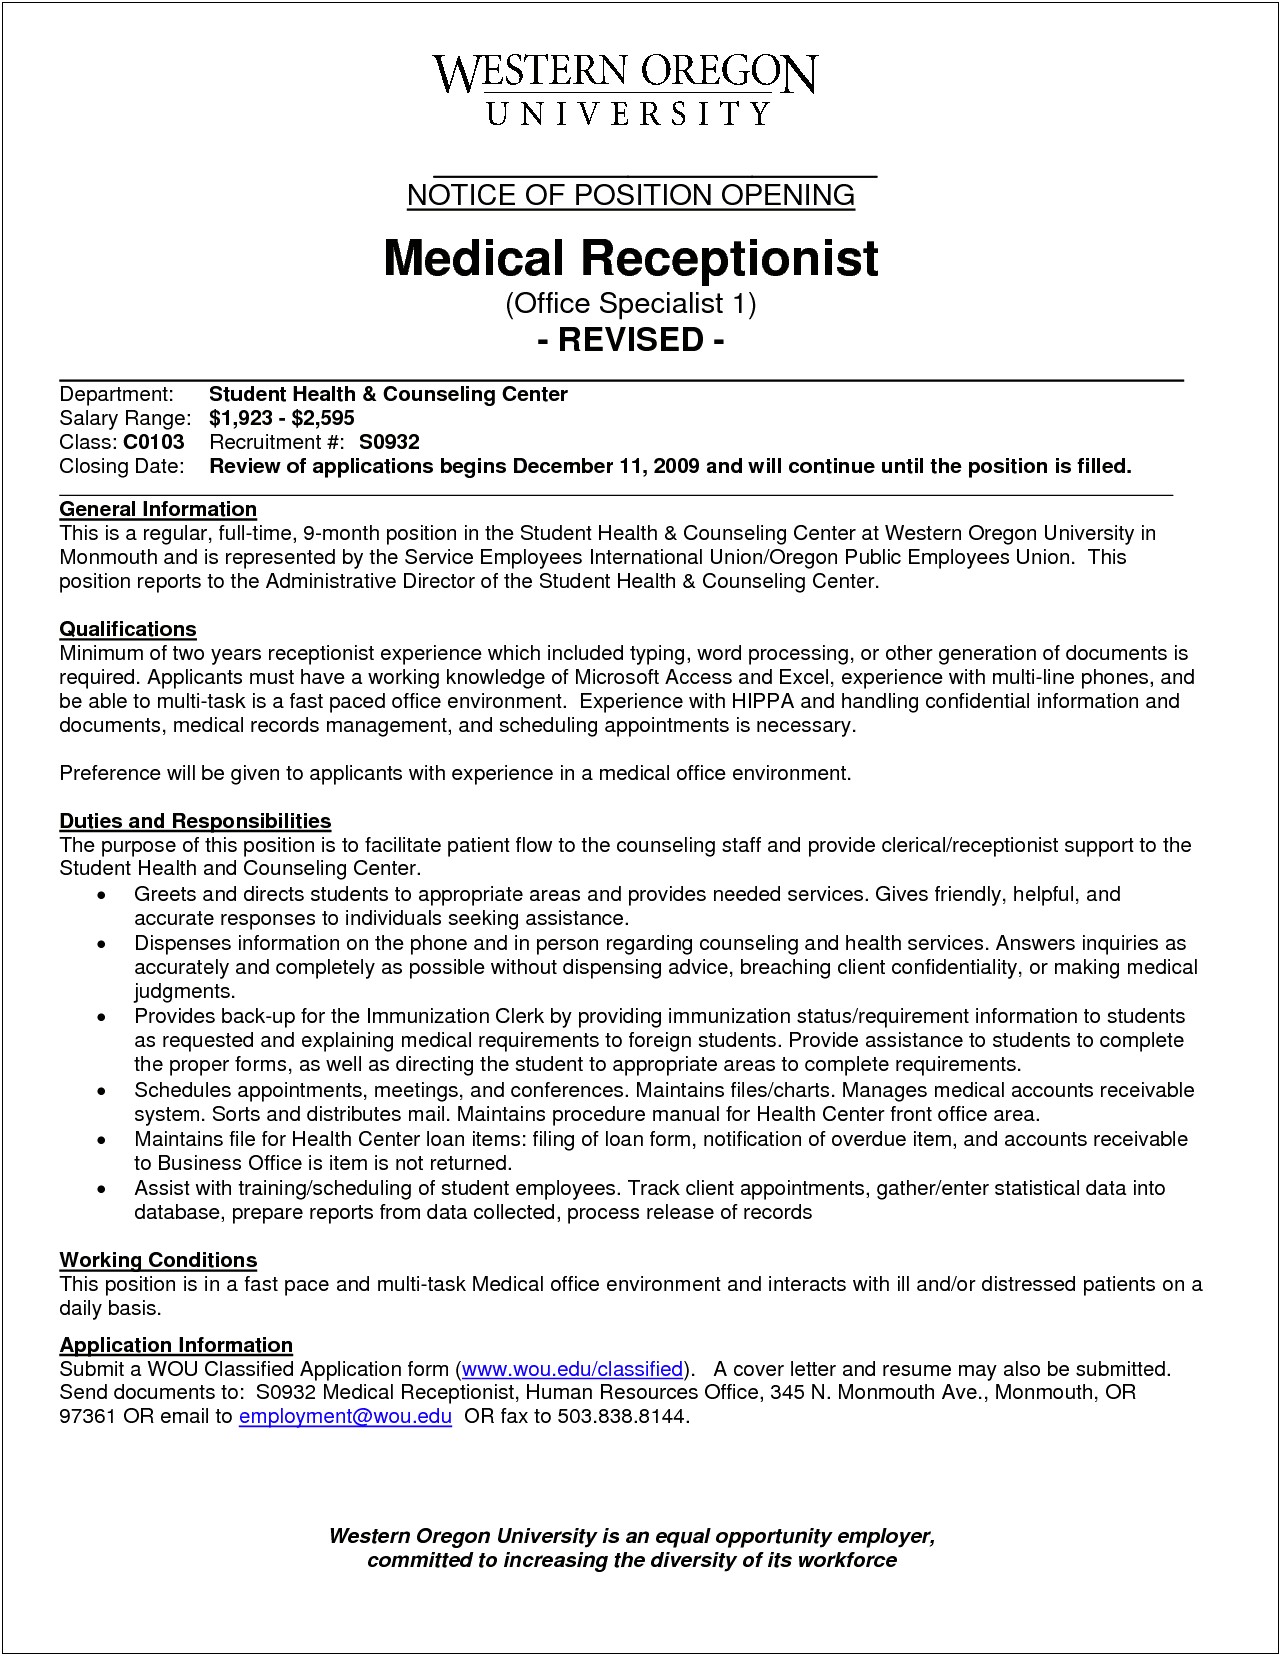 Resume Objective For Medical Office Receptionist